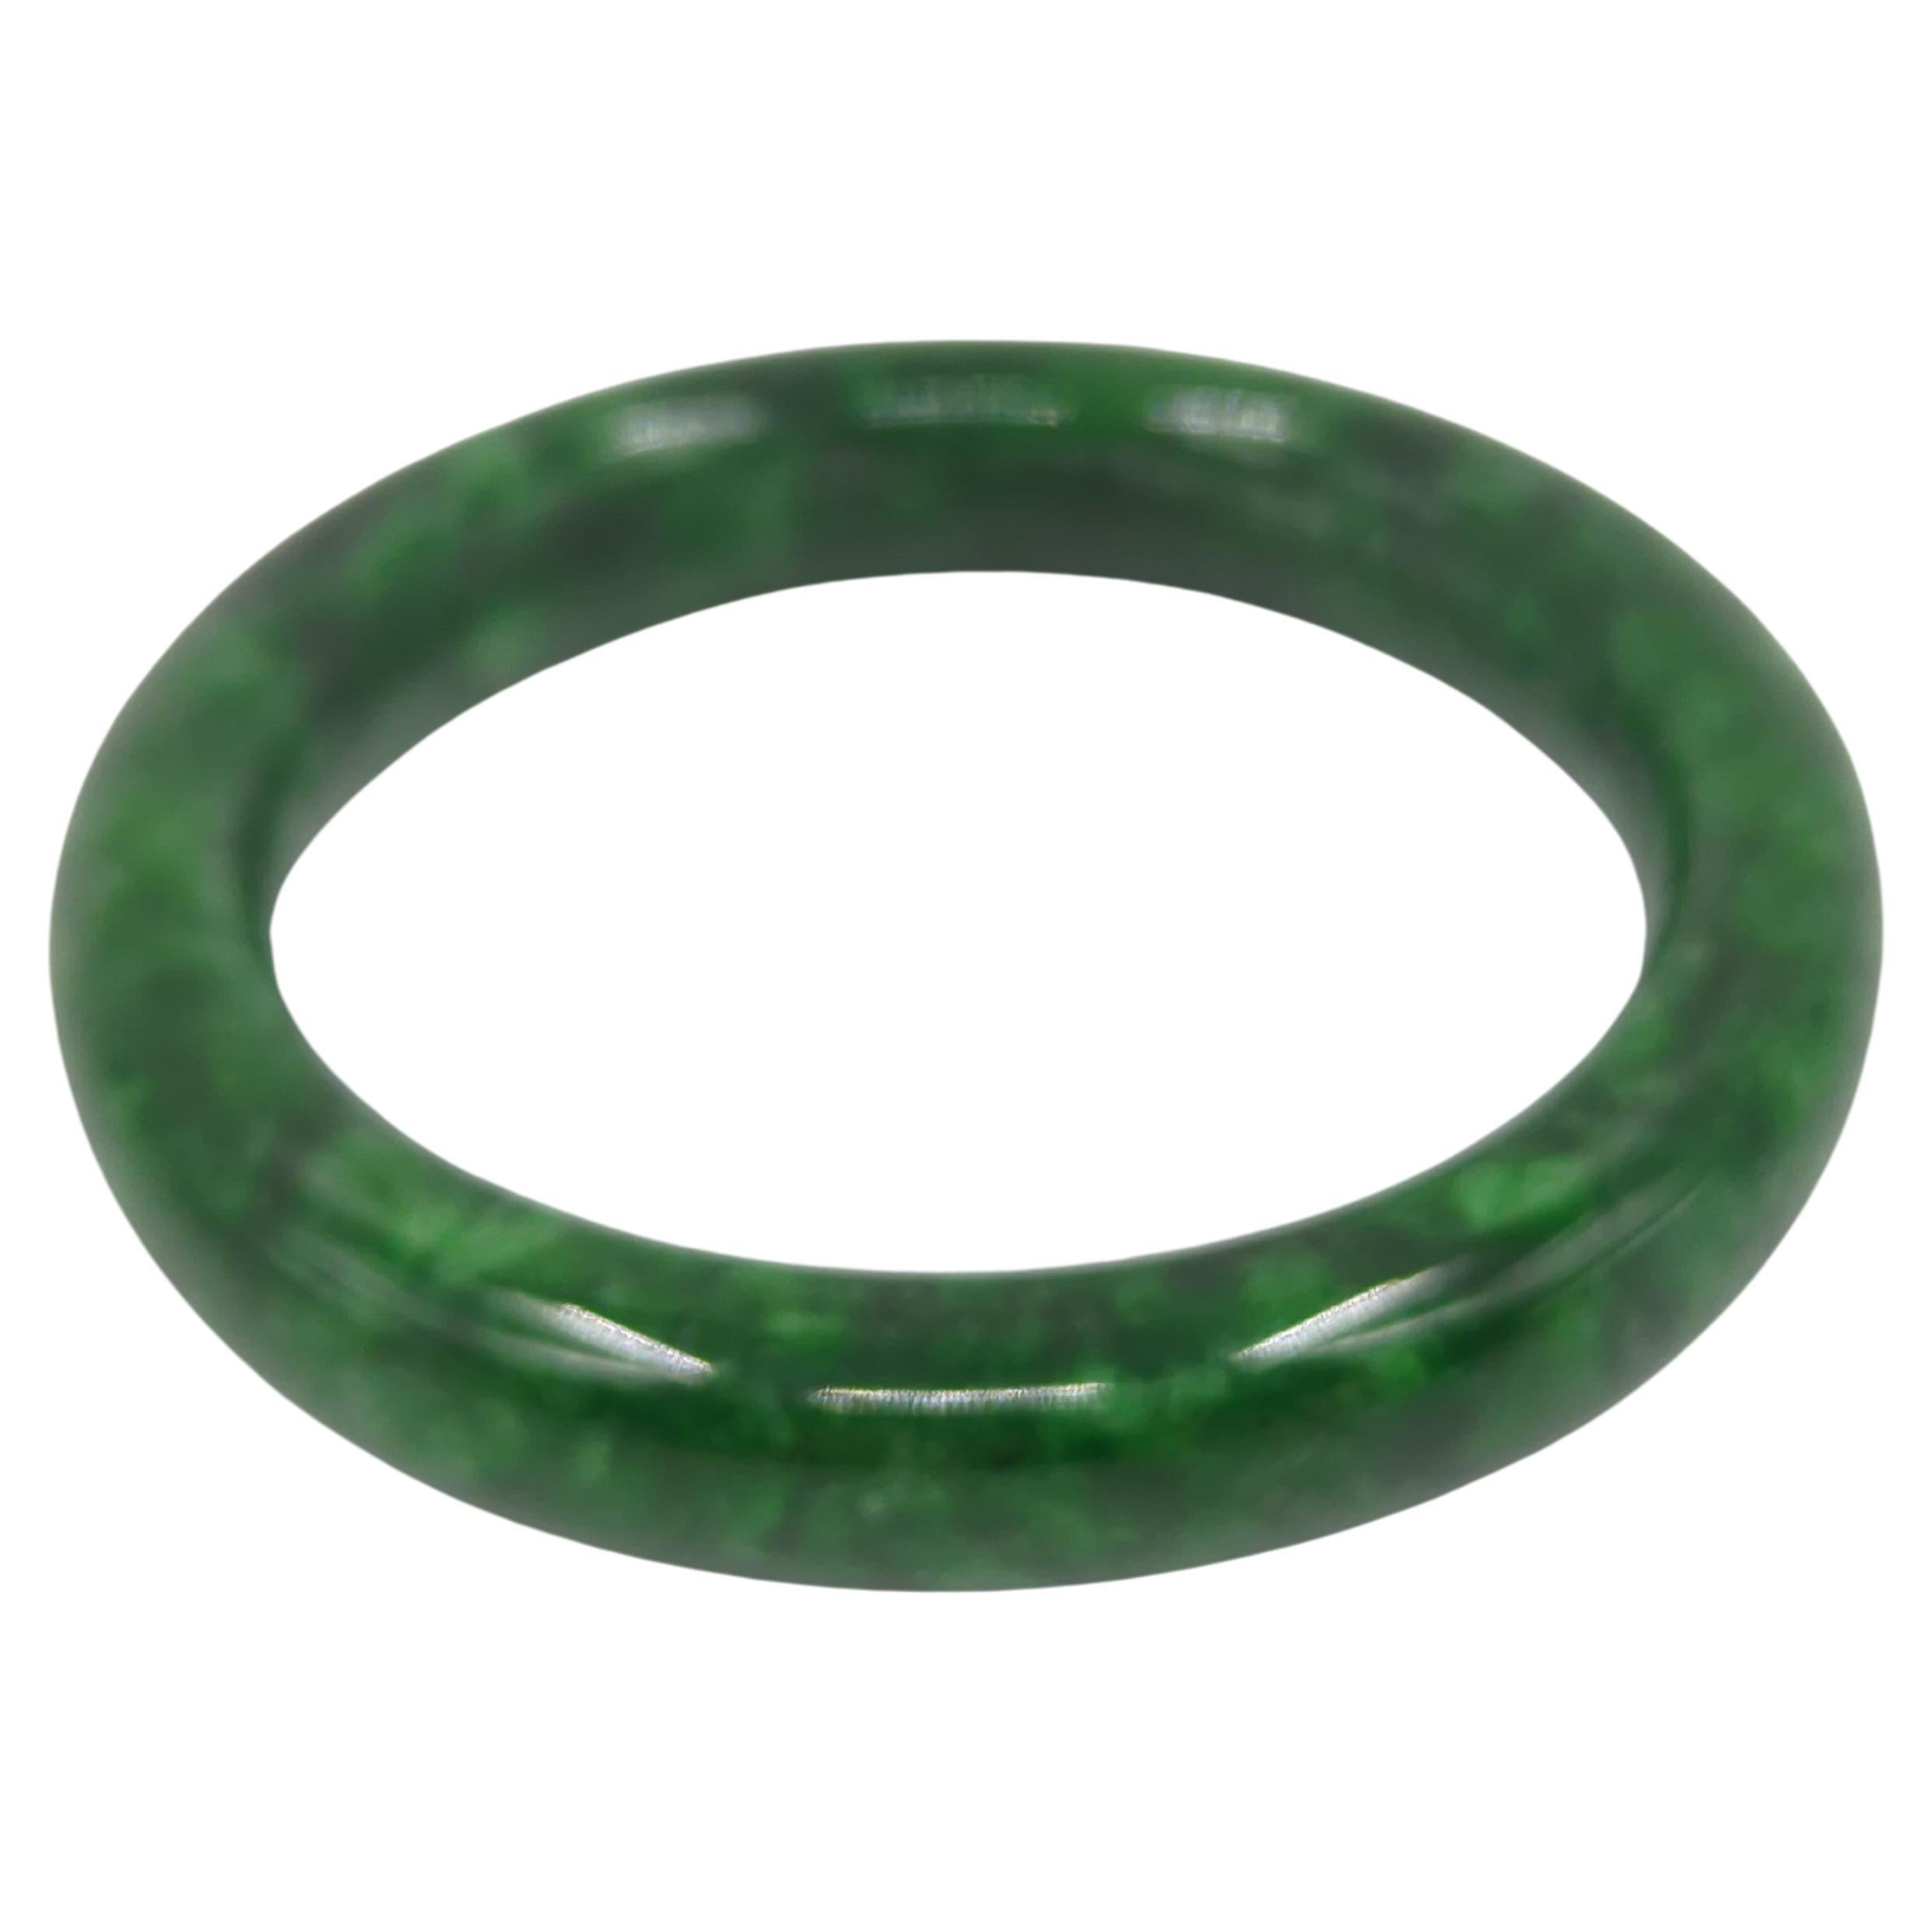 Chloromelanite, a variety of jadeite known for its rich, dark green color, is a fascinating and valuable material that has been appreciated in Chinese culture for centuries. This hardstone, characterized by its medium to dark emerald green hues and